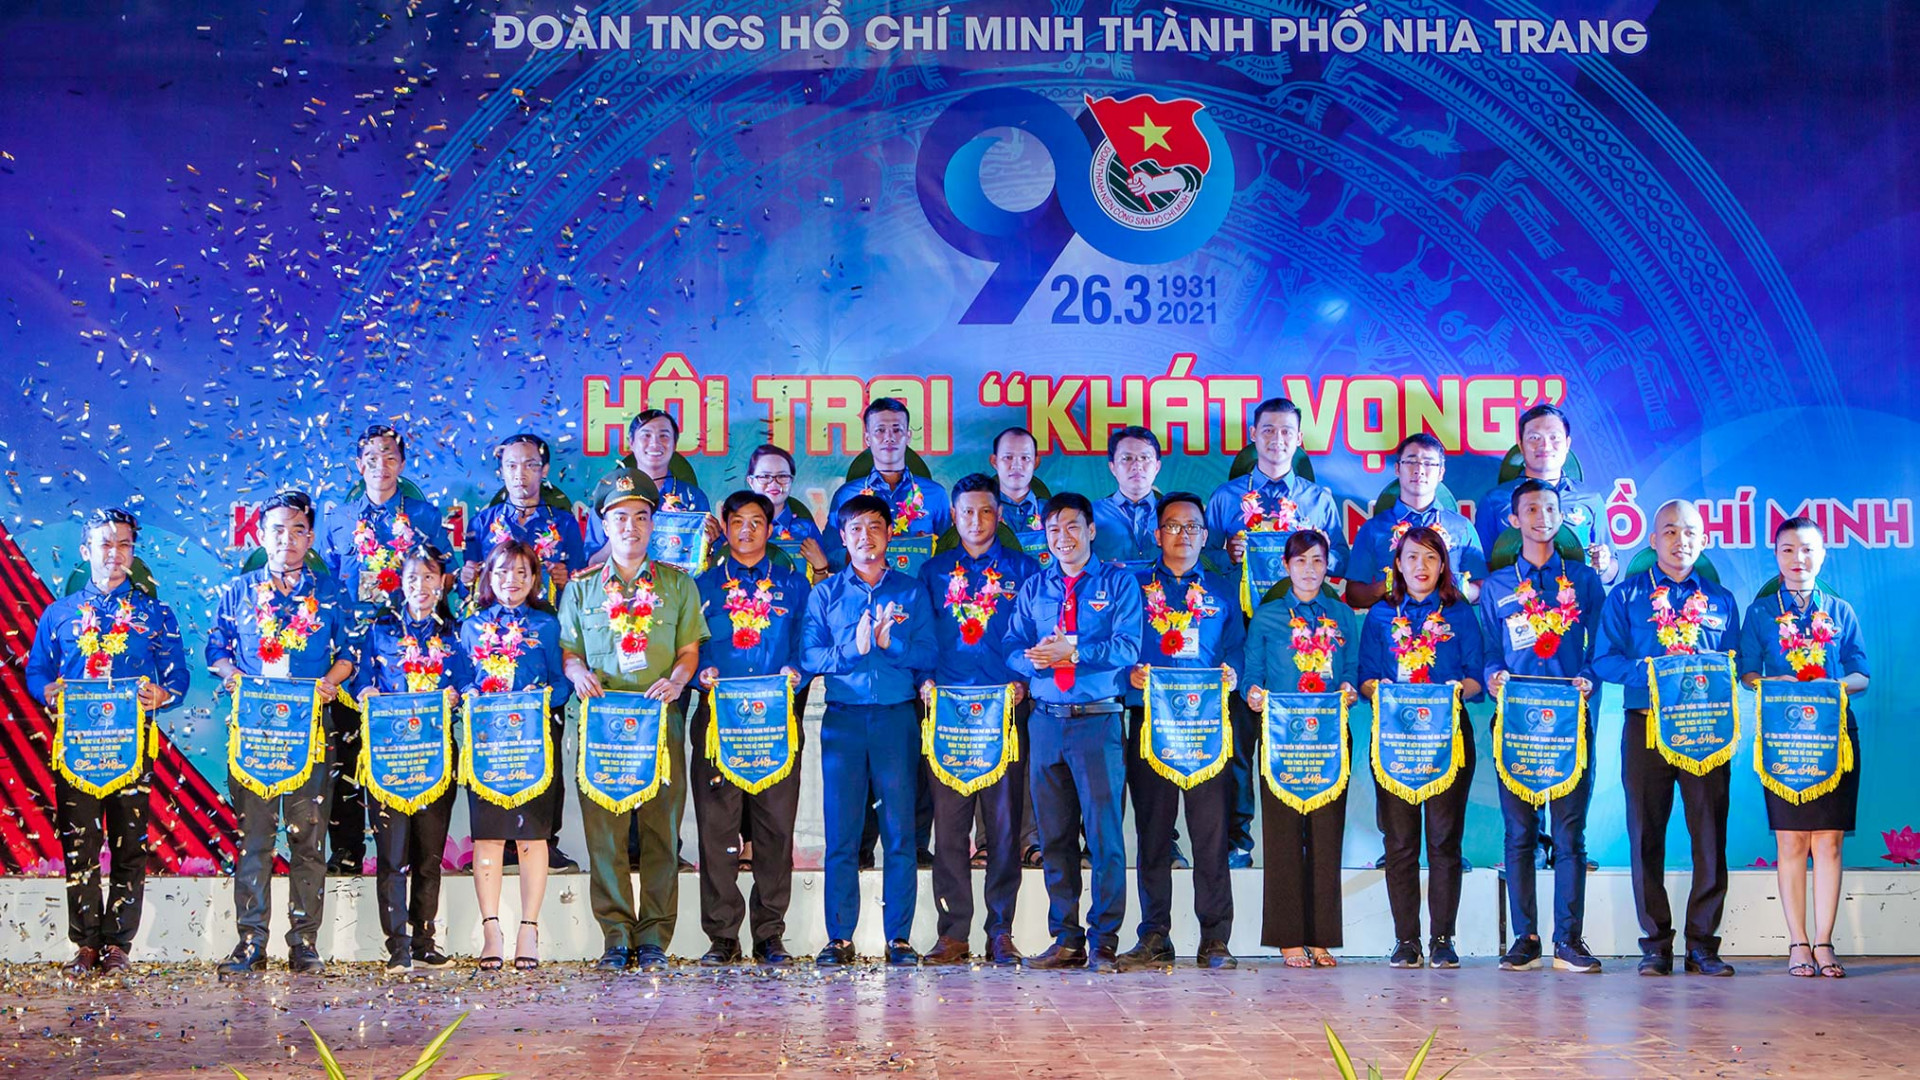 On this occasion, the camp organizers commend 90 elite Nha Trang Youth Union leaders 